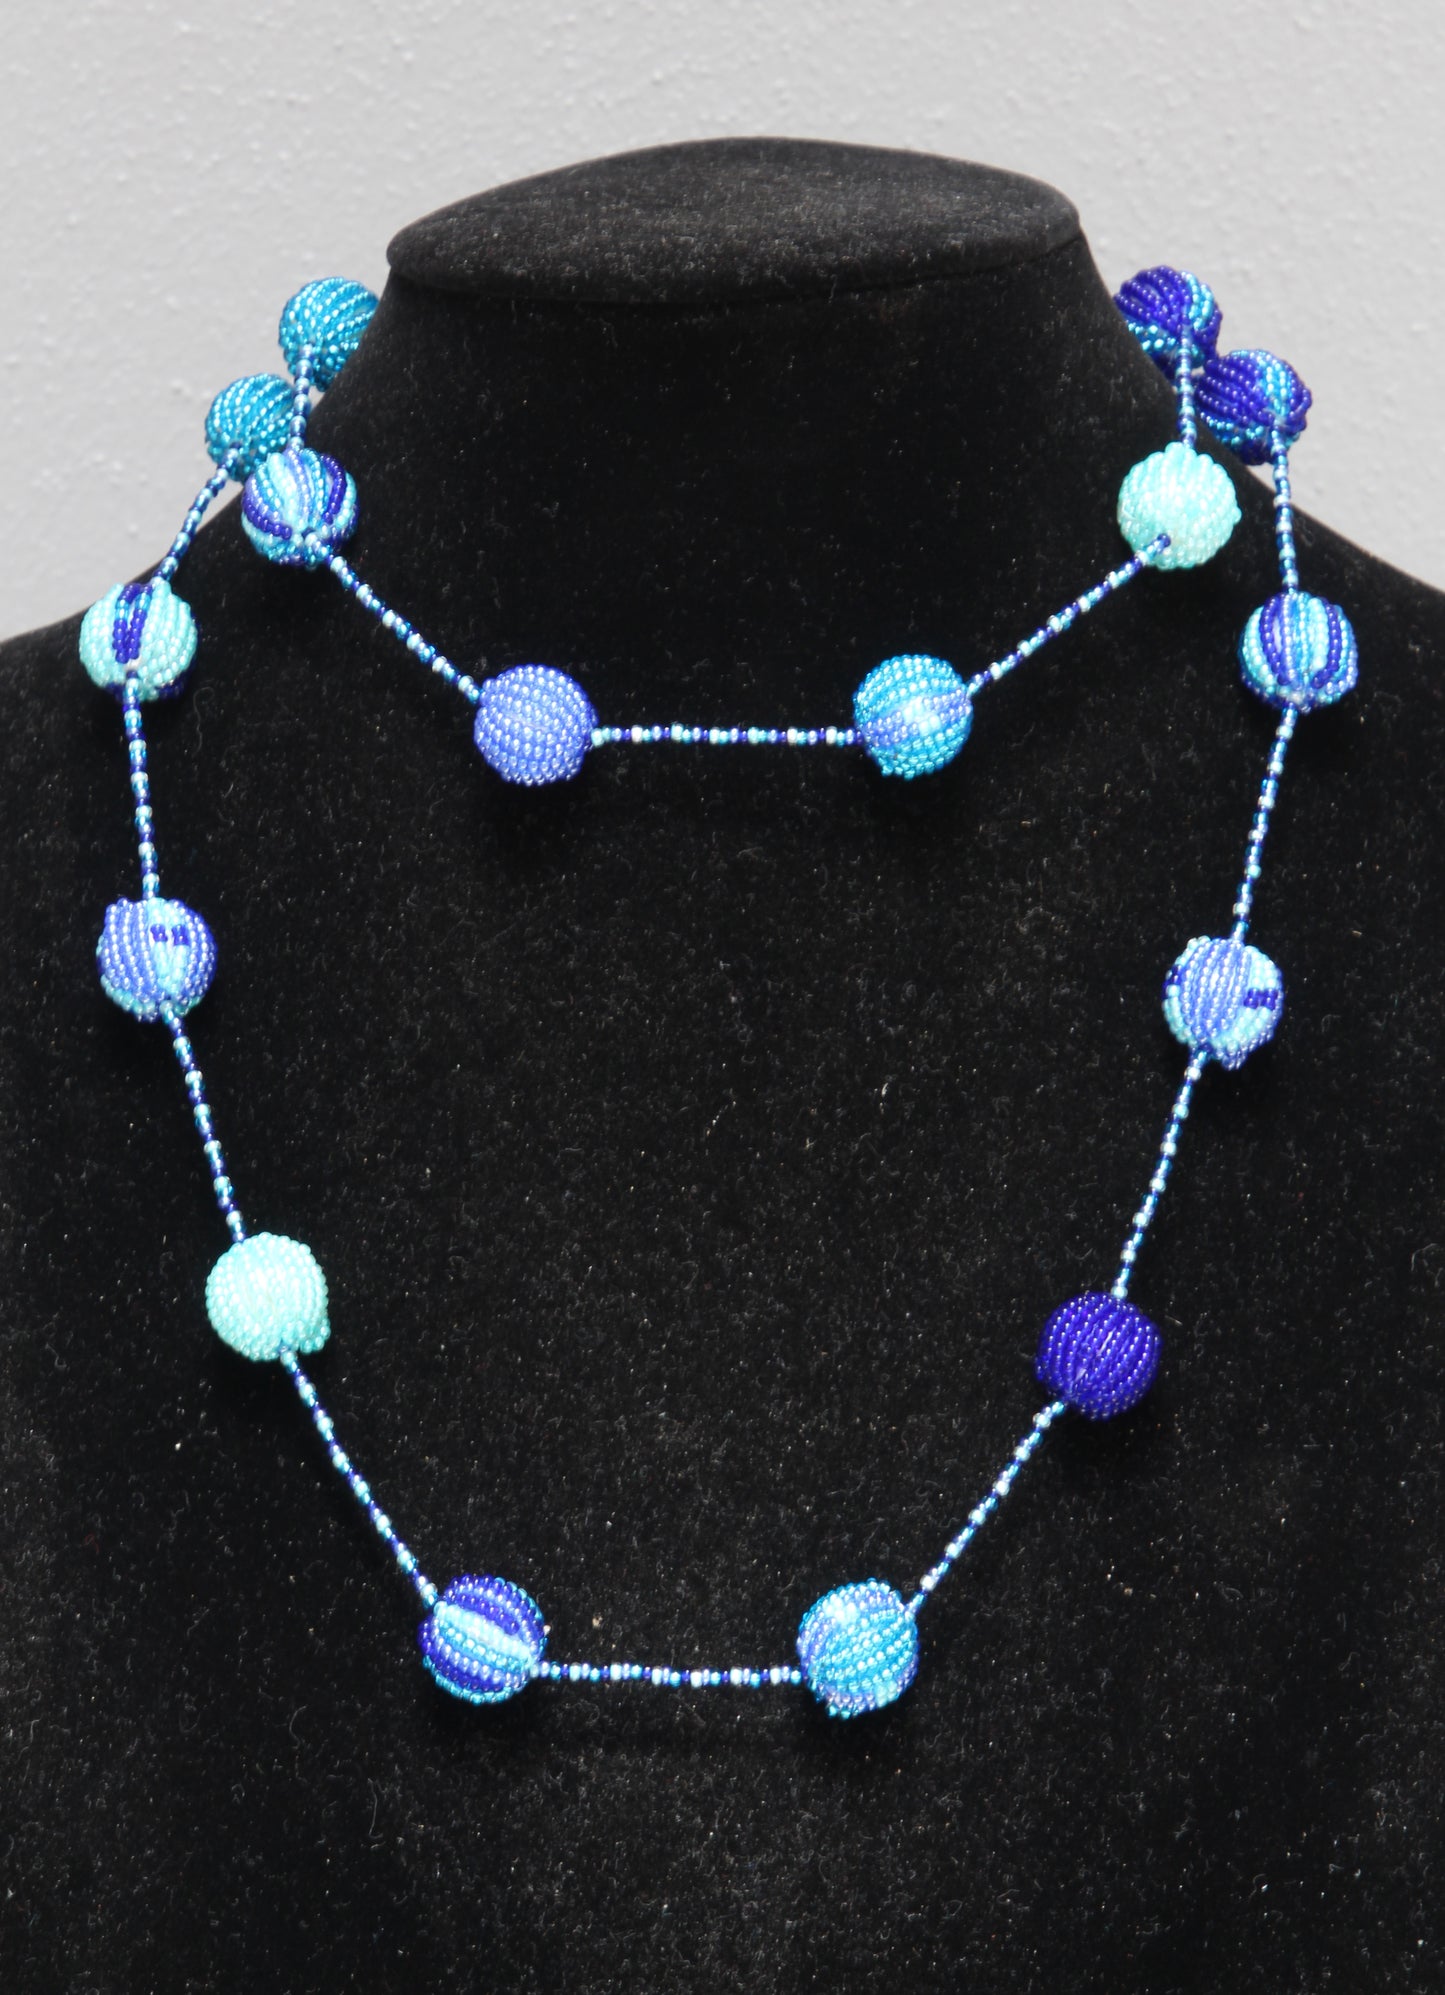 Multi-beaded African mint green and blue necklace